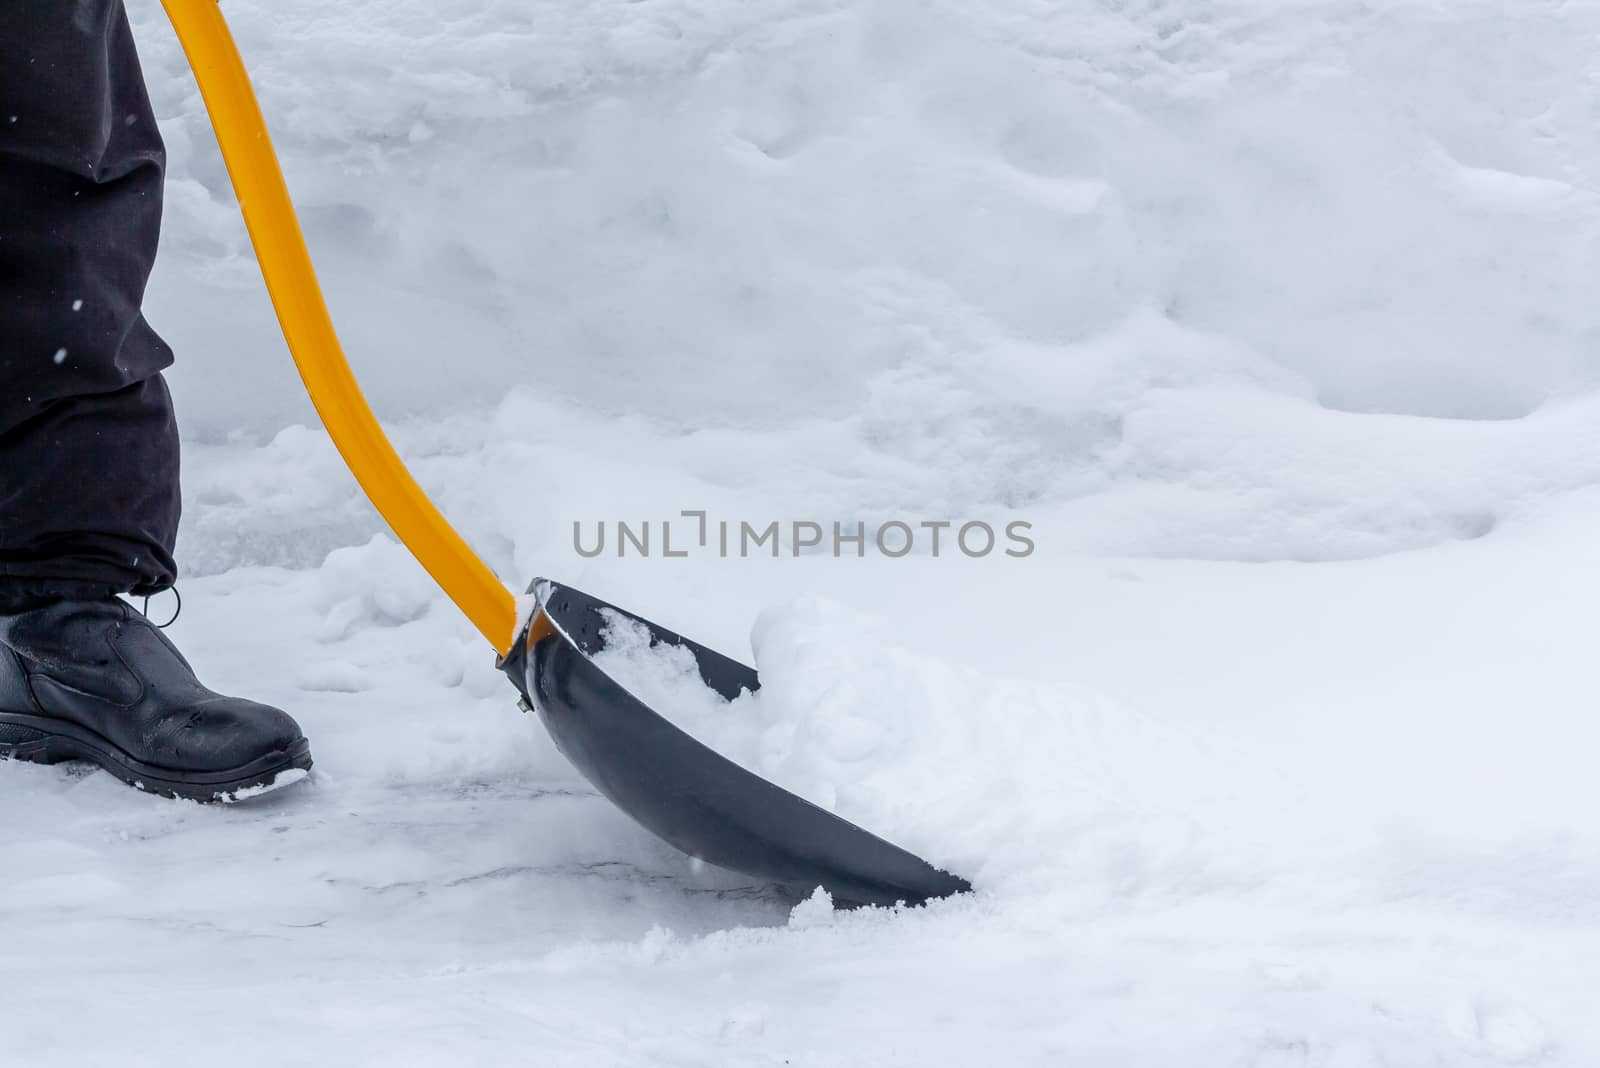 A man cleans snow in the yard with a shovel after a heavy snowfall.